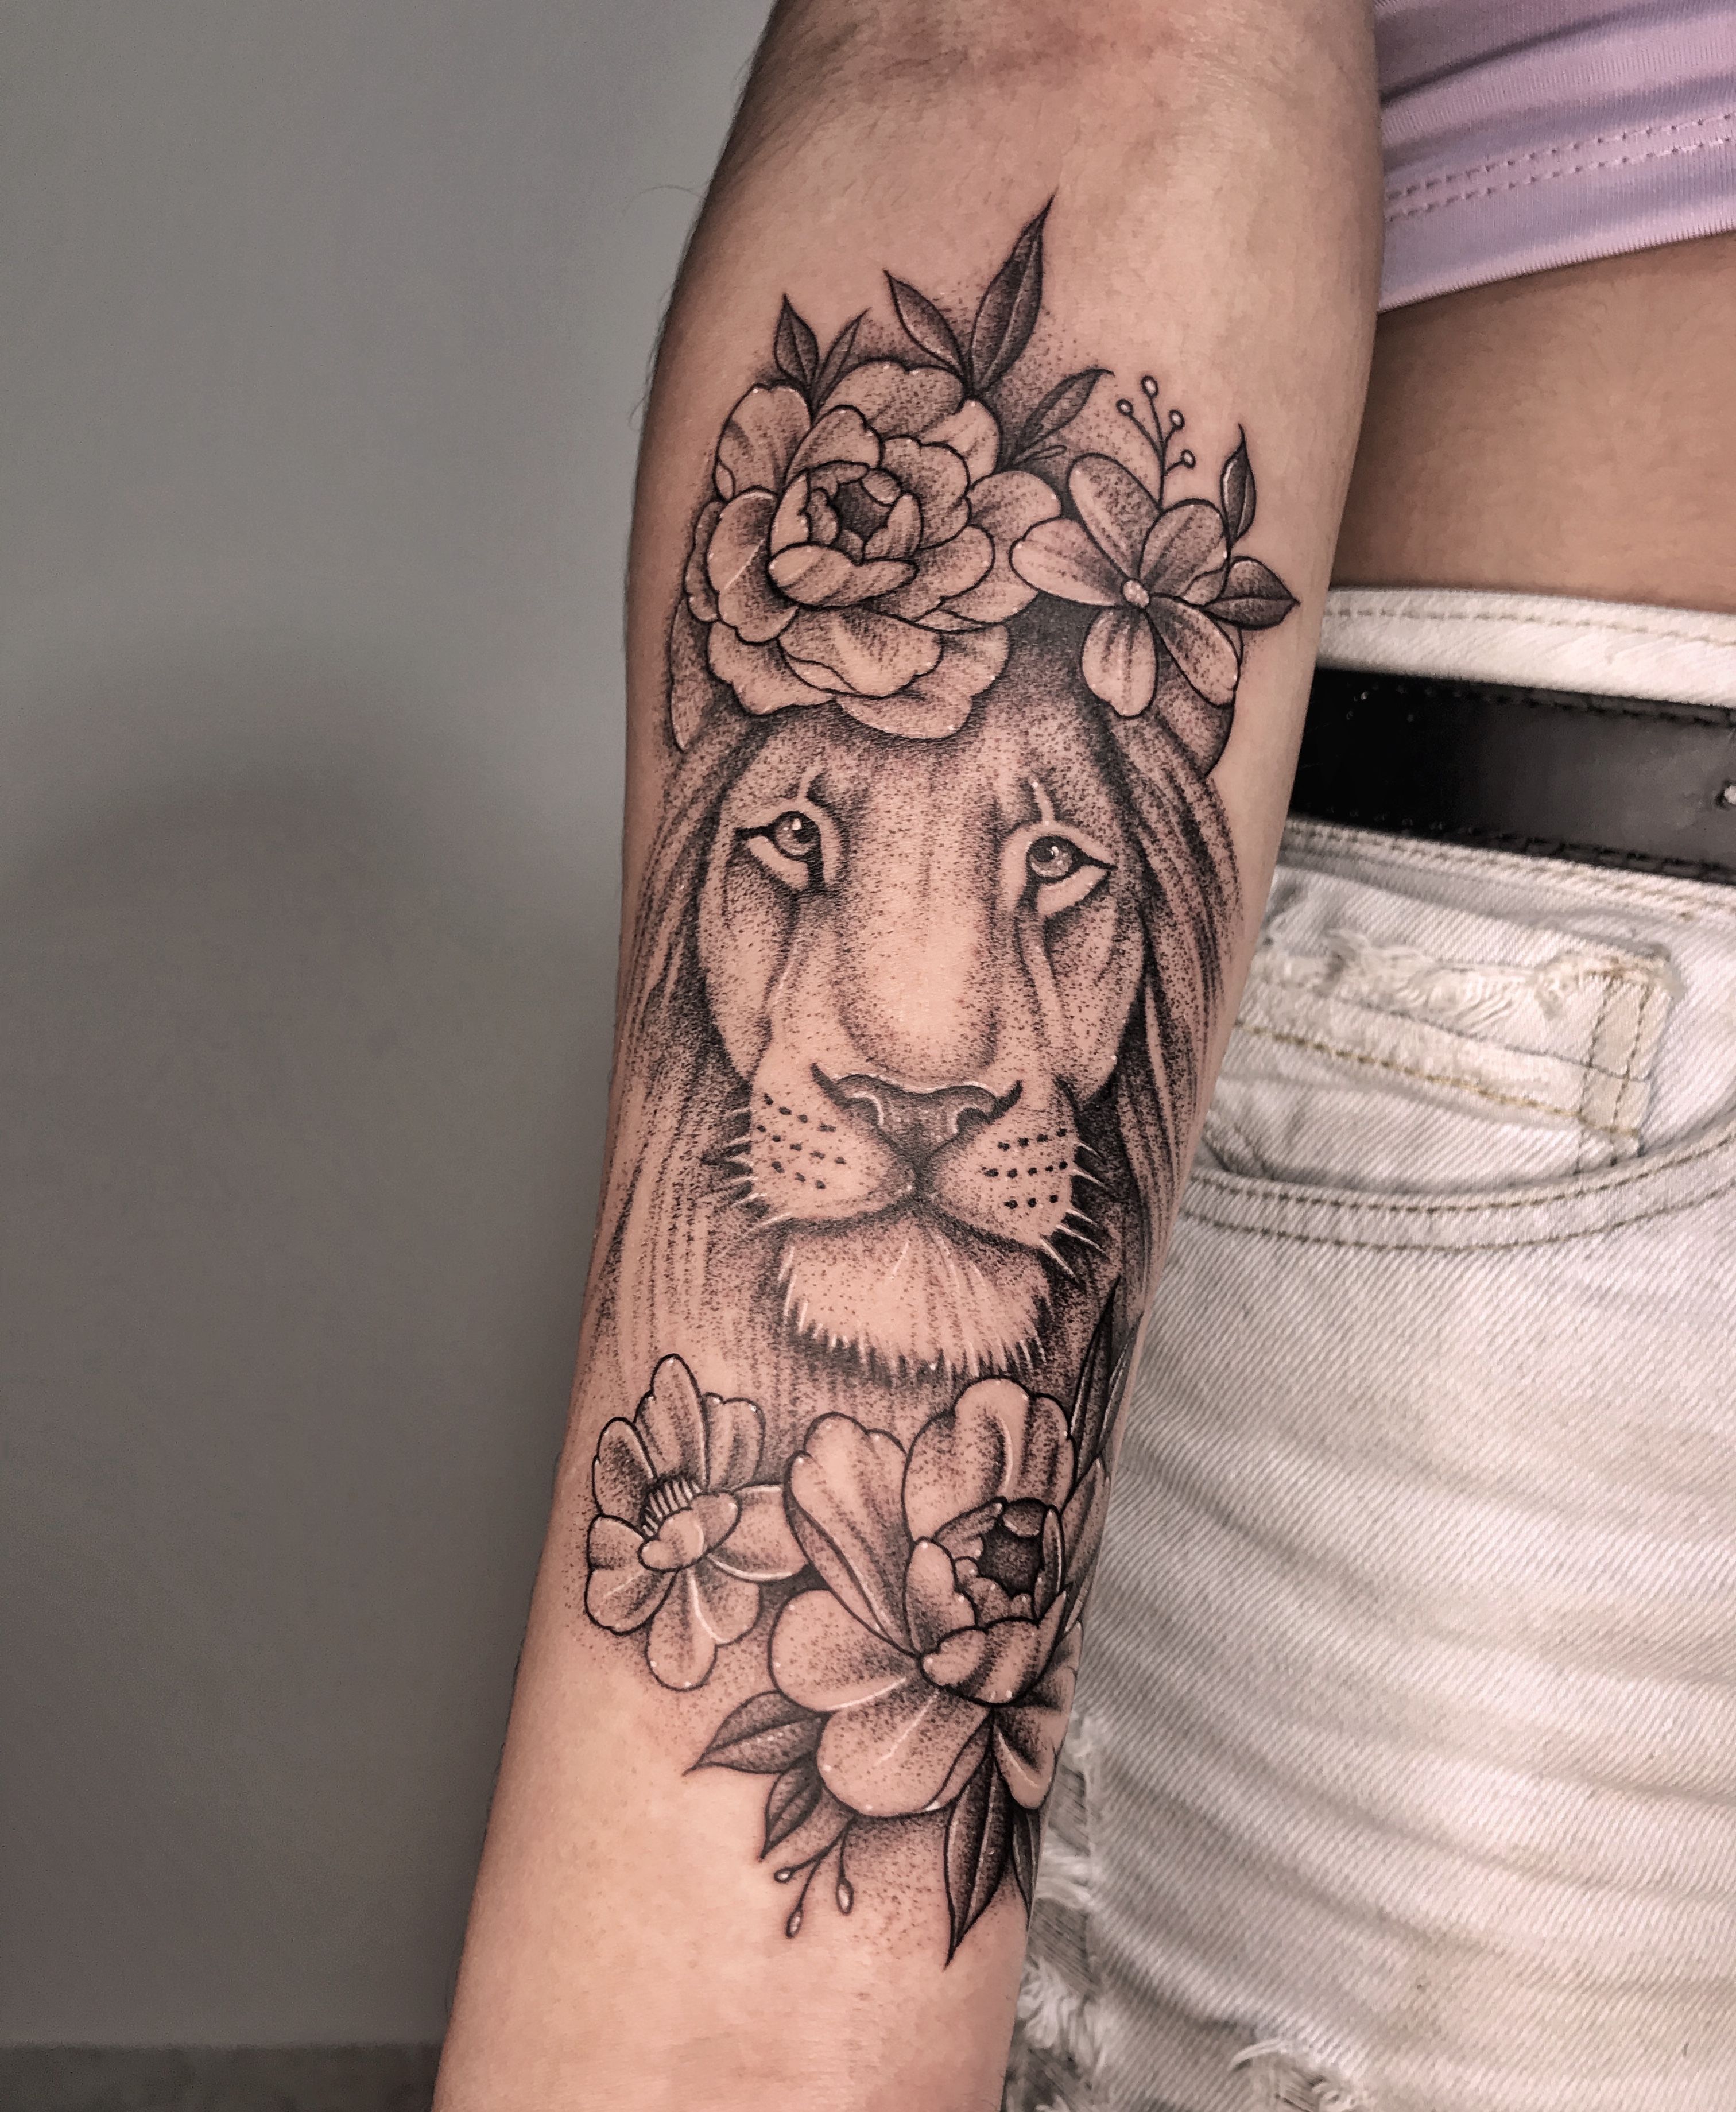 7 Sheets Waterproof Temporary Tattoos For Women Men Flower Lion 14.8X21Cm  Fake Tattoo Stickers Adult Kids Women Neck Arm Thigh Tattoo Sticker,  Temporary Tattoos For Women Arm Neck : Amazon.co.uk: Beauty